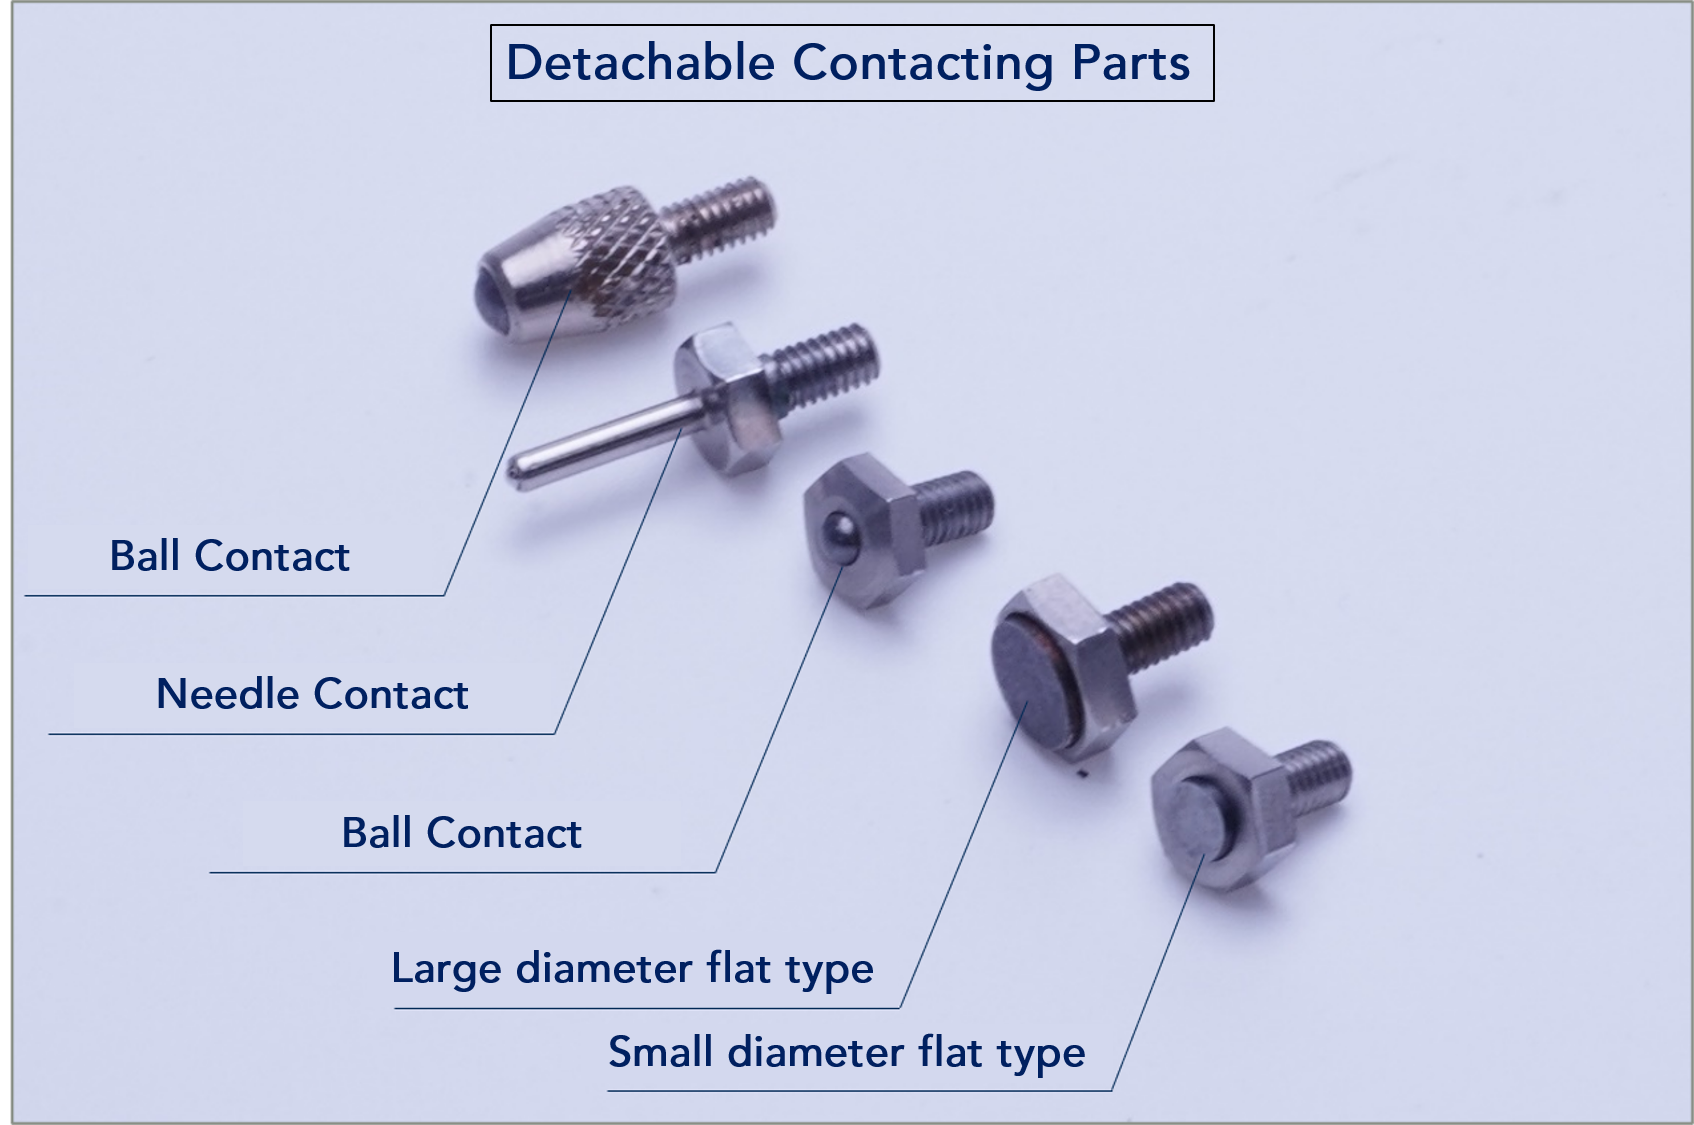 Example of separately sold contacting parts